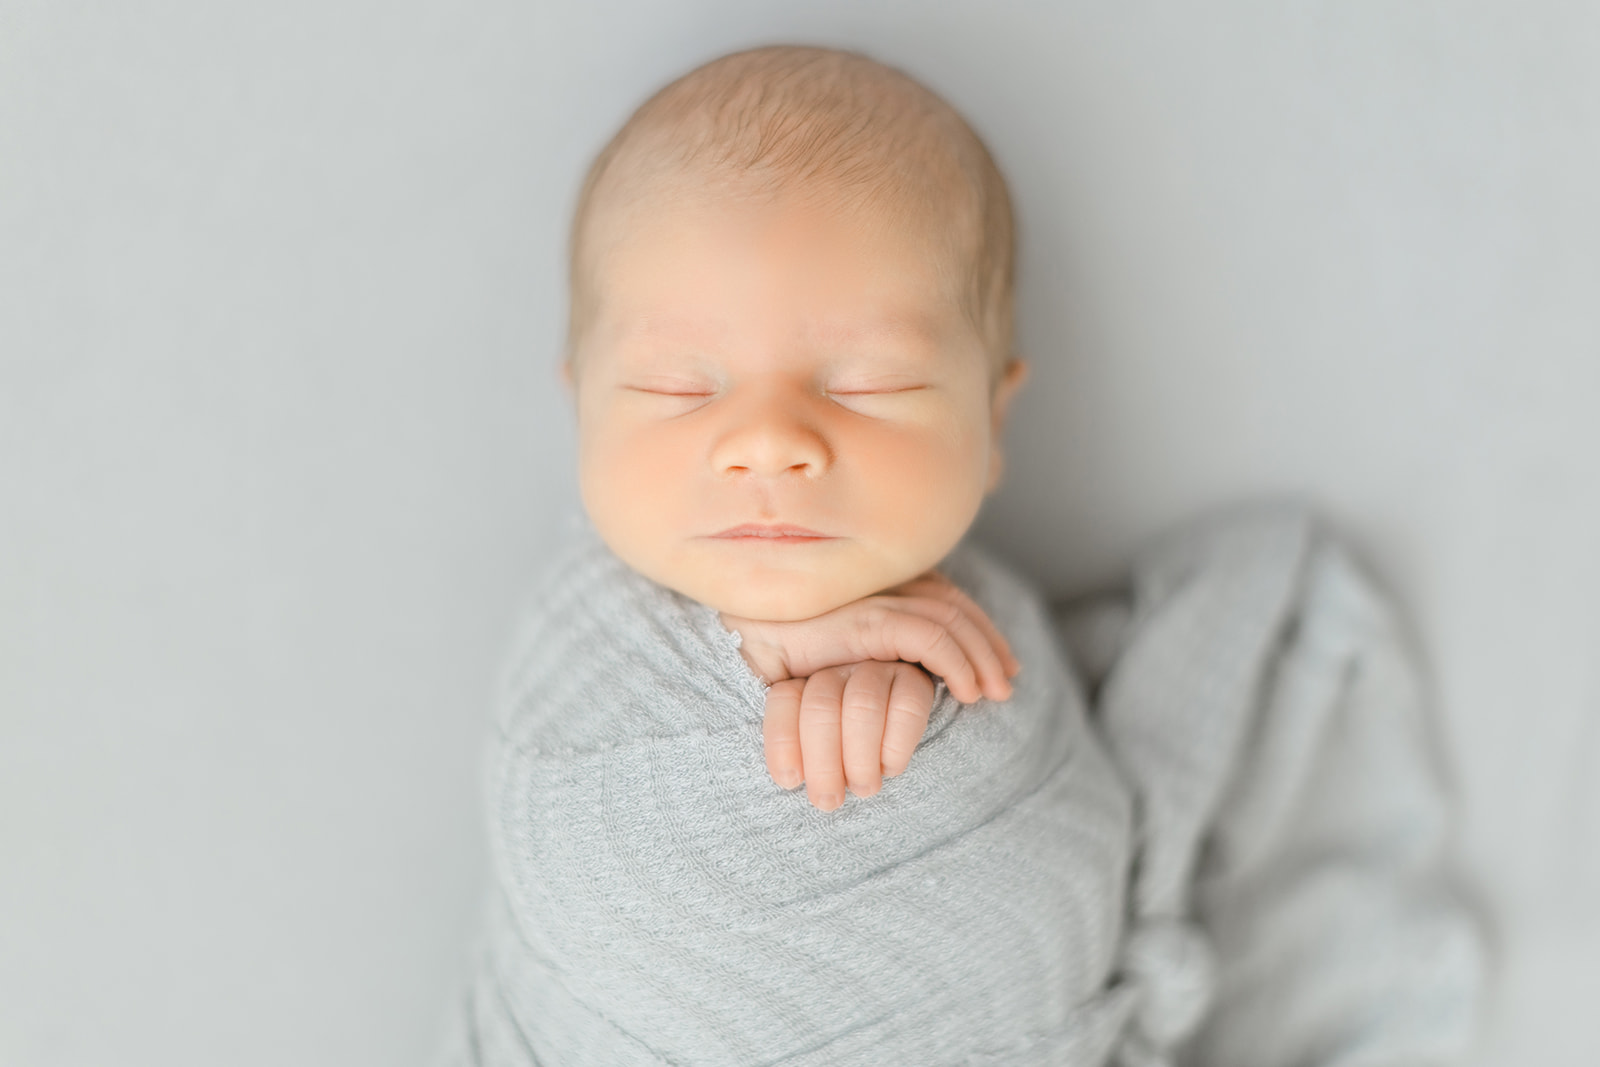 A newborn baby sleeps in a grey swaddle with hands sticking out in a studio